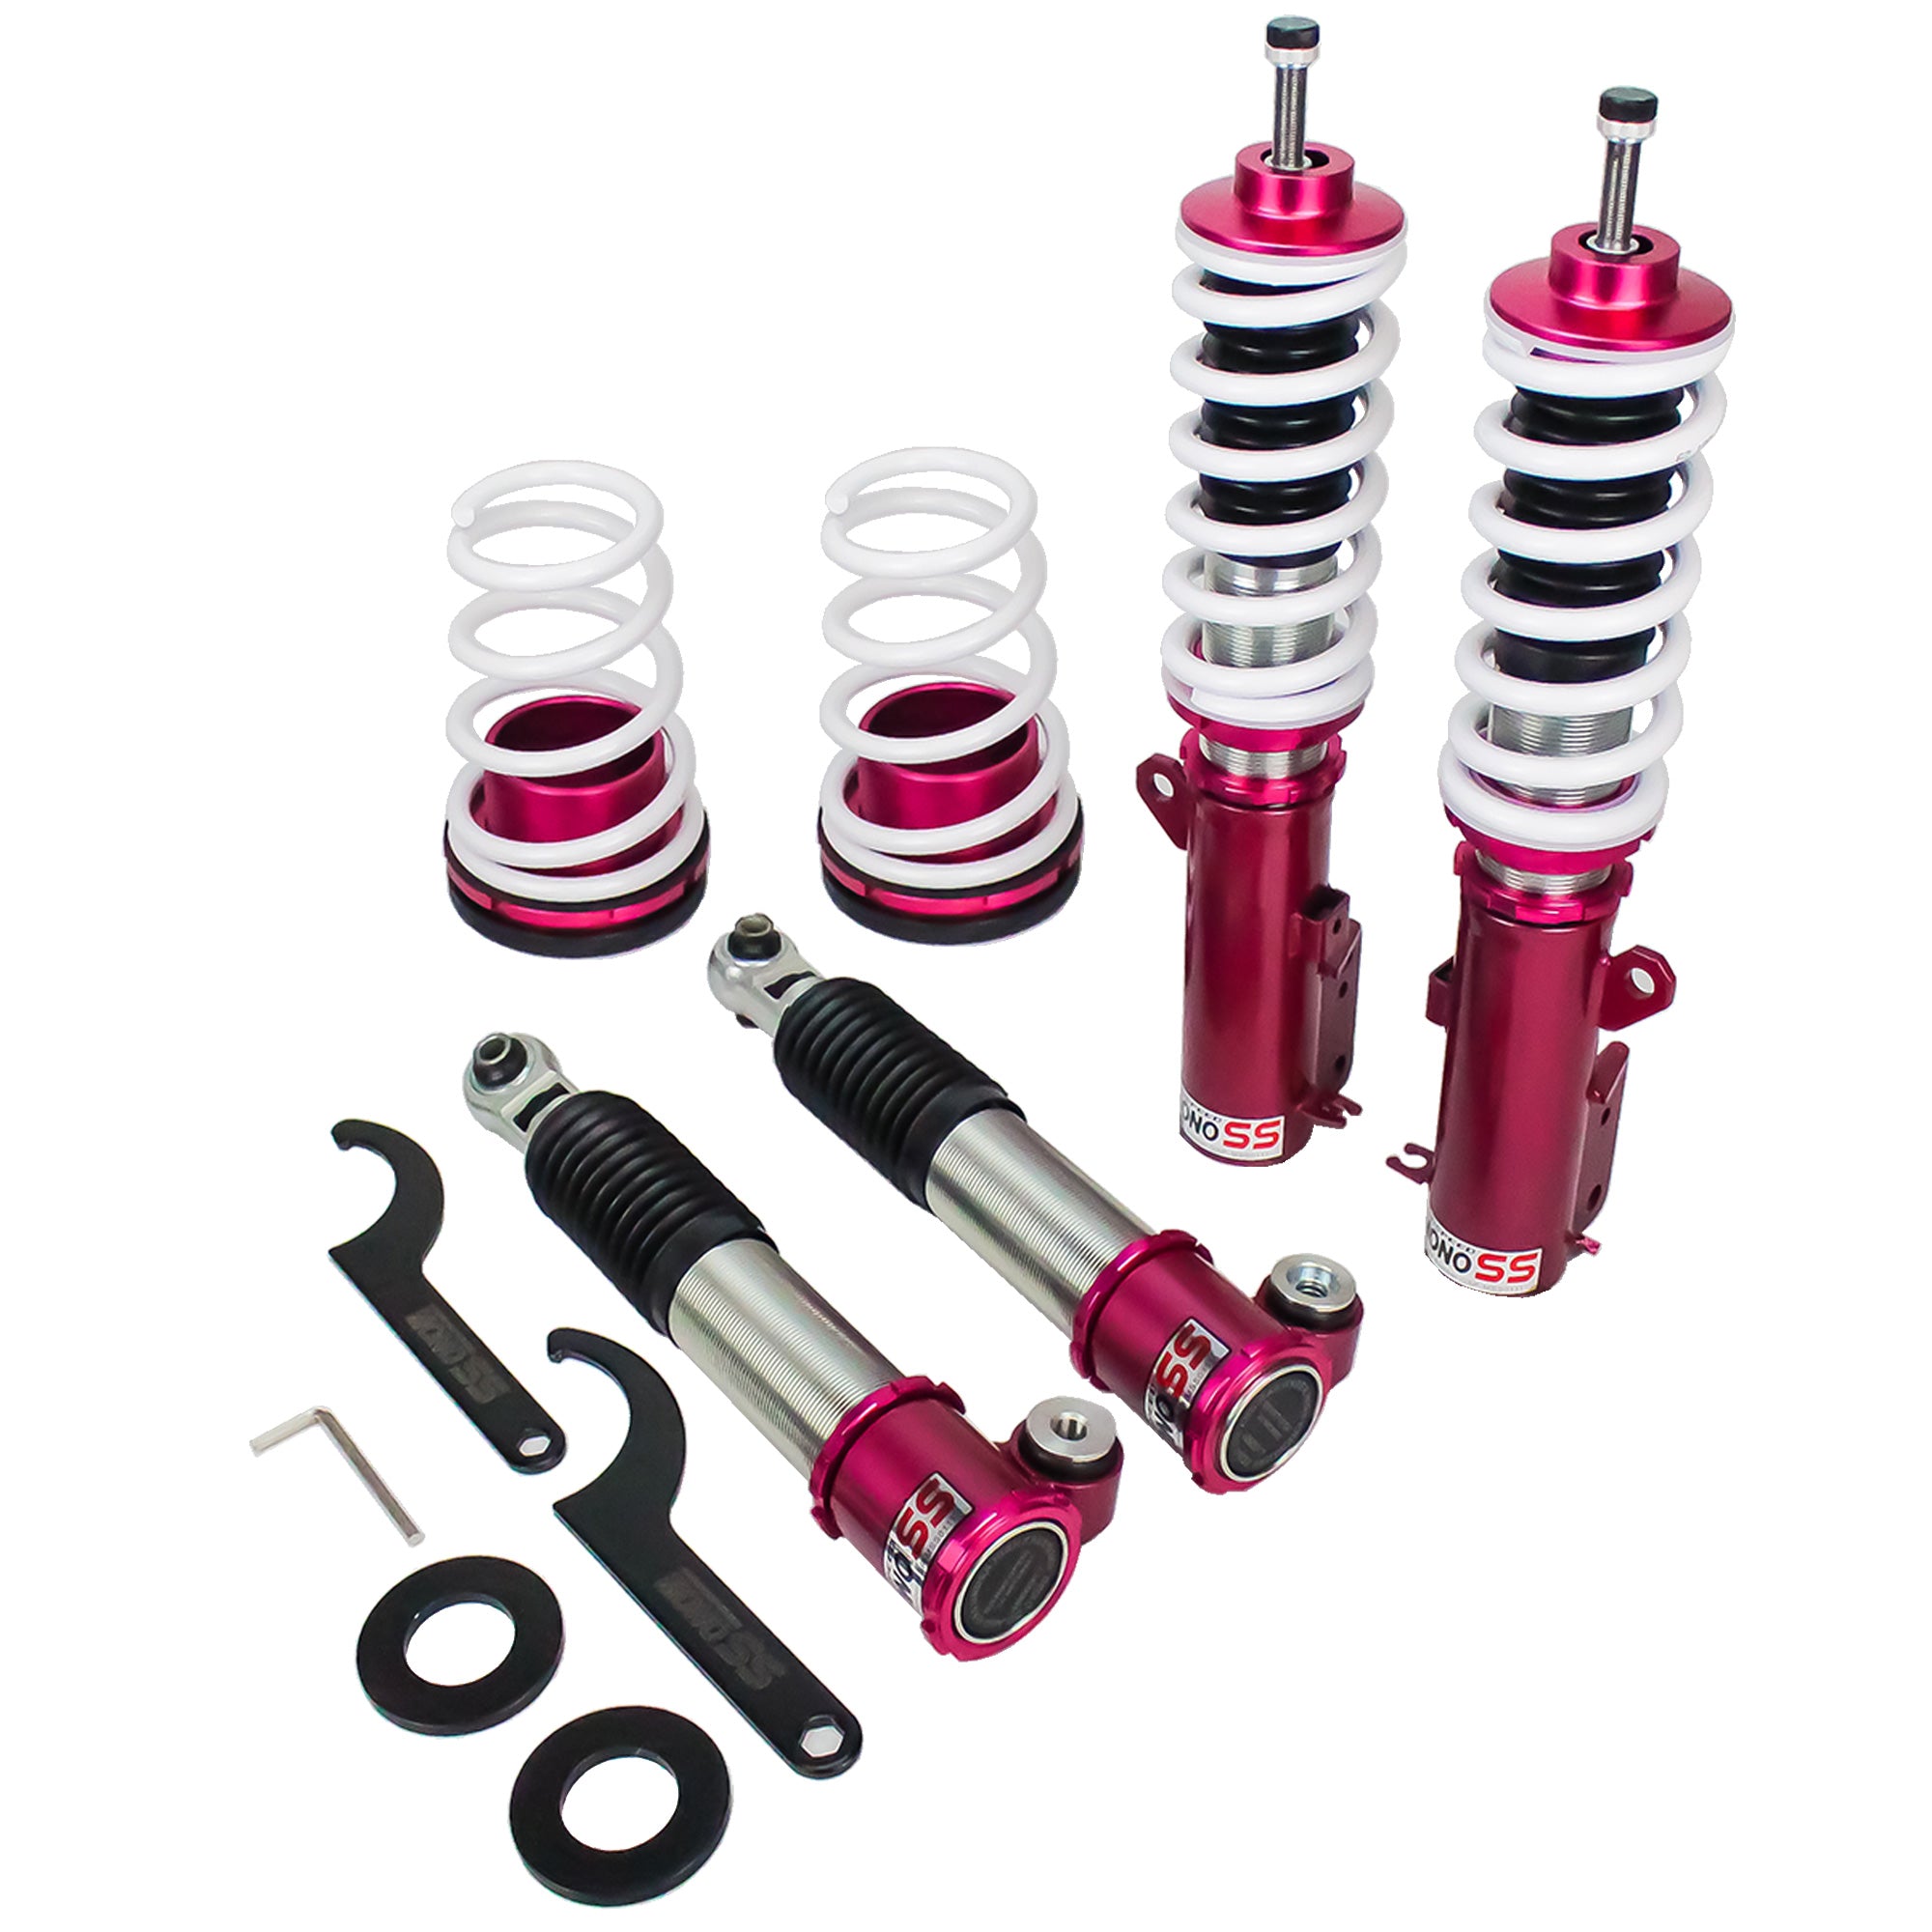 Godspeed MSS0111-B MonoSS Coilover Lowering Kit, Fully Adjustable, Ride Height, Spring Tension And 16 Click Damping, Kia Rio(UB) 2012-17